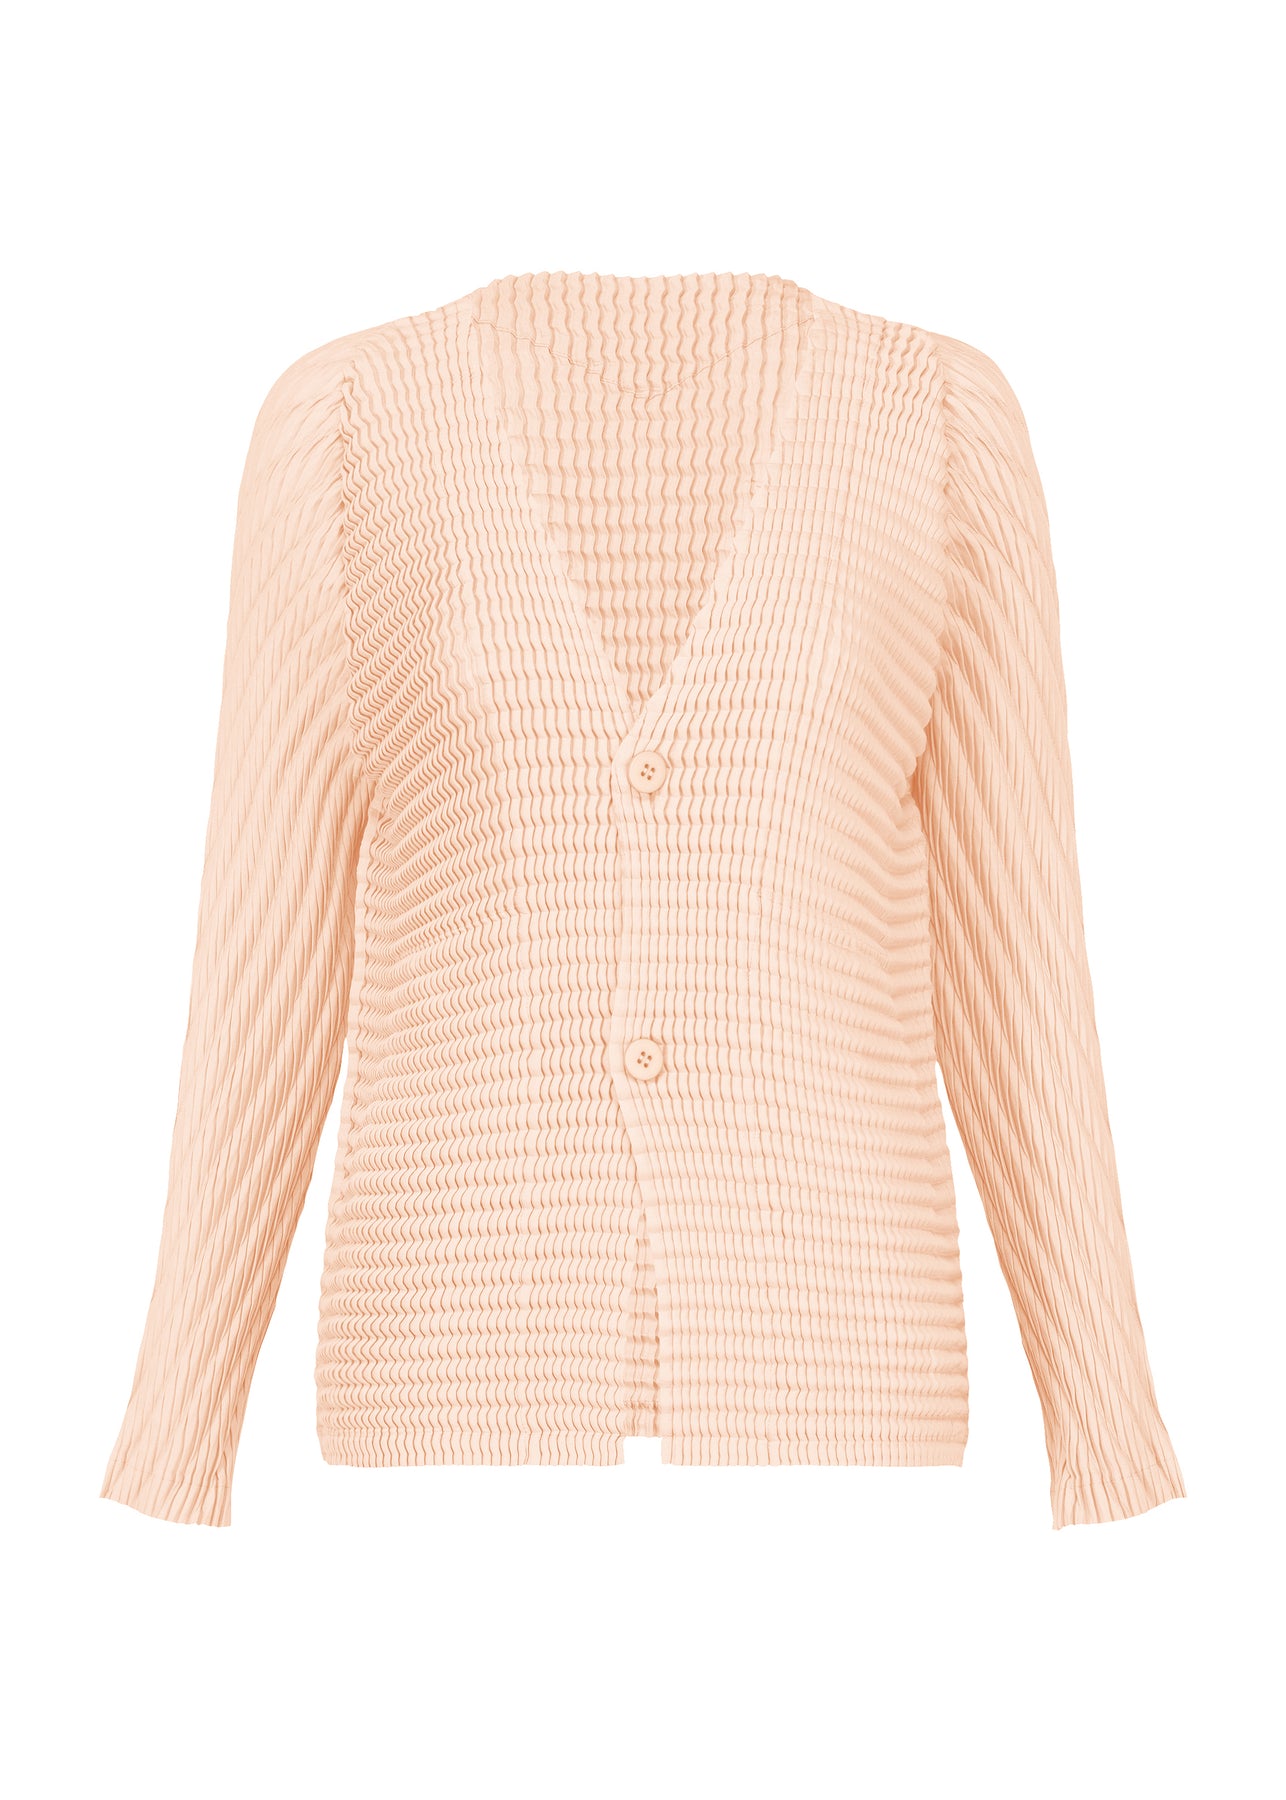 WOOL LIKE PLEATS CARDIGAN | The official ISSEY MIYAKE ONLINE STORE 